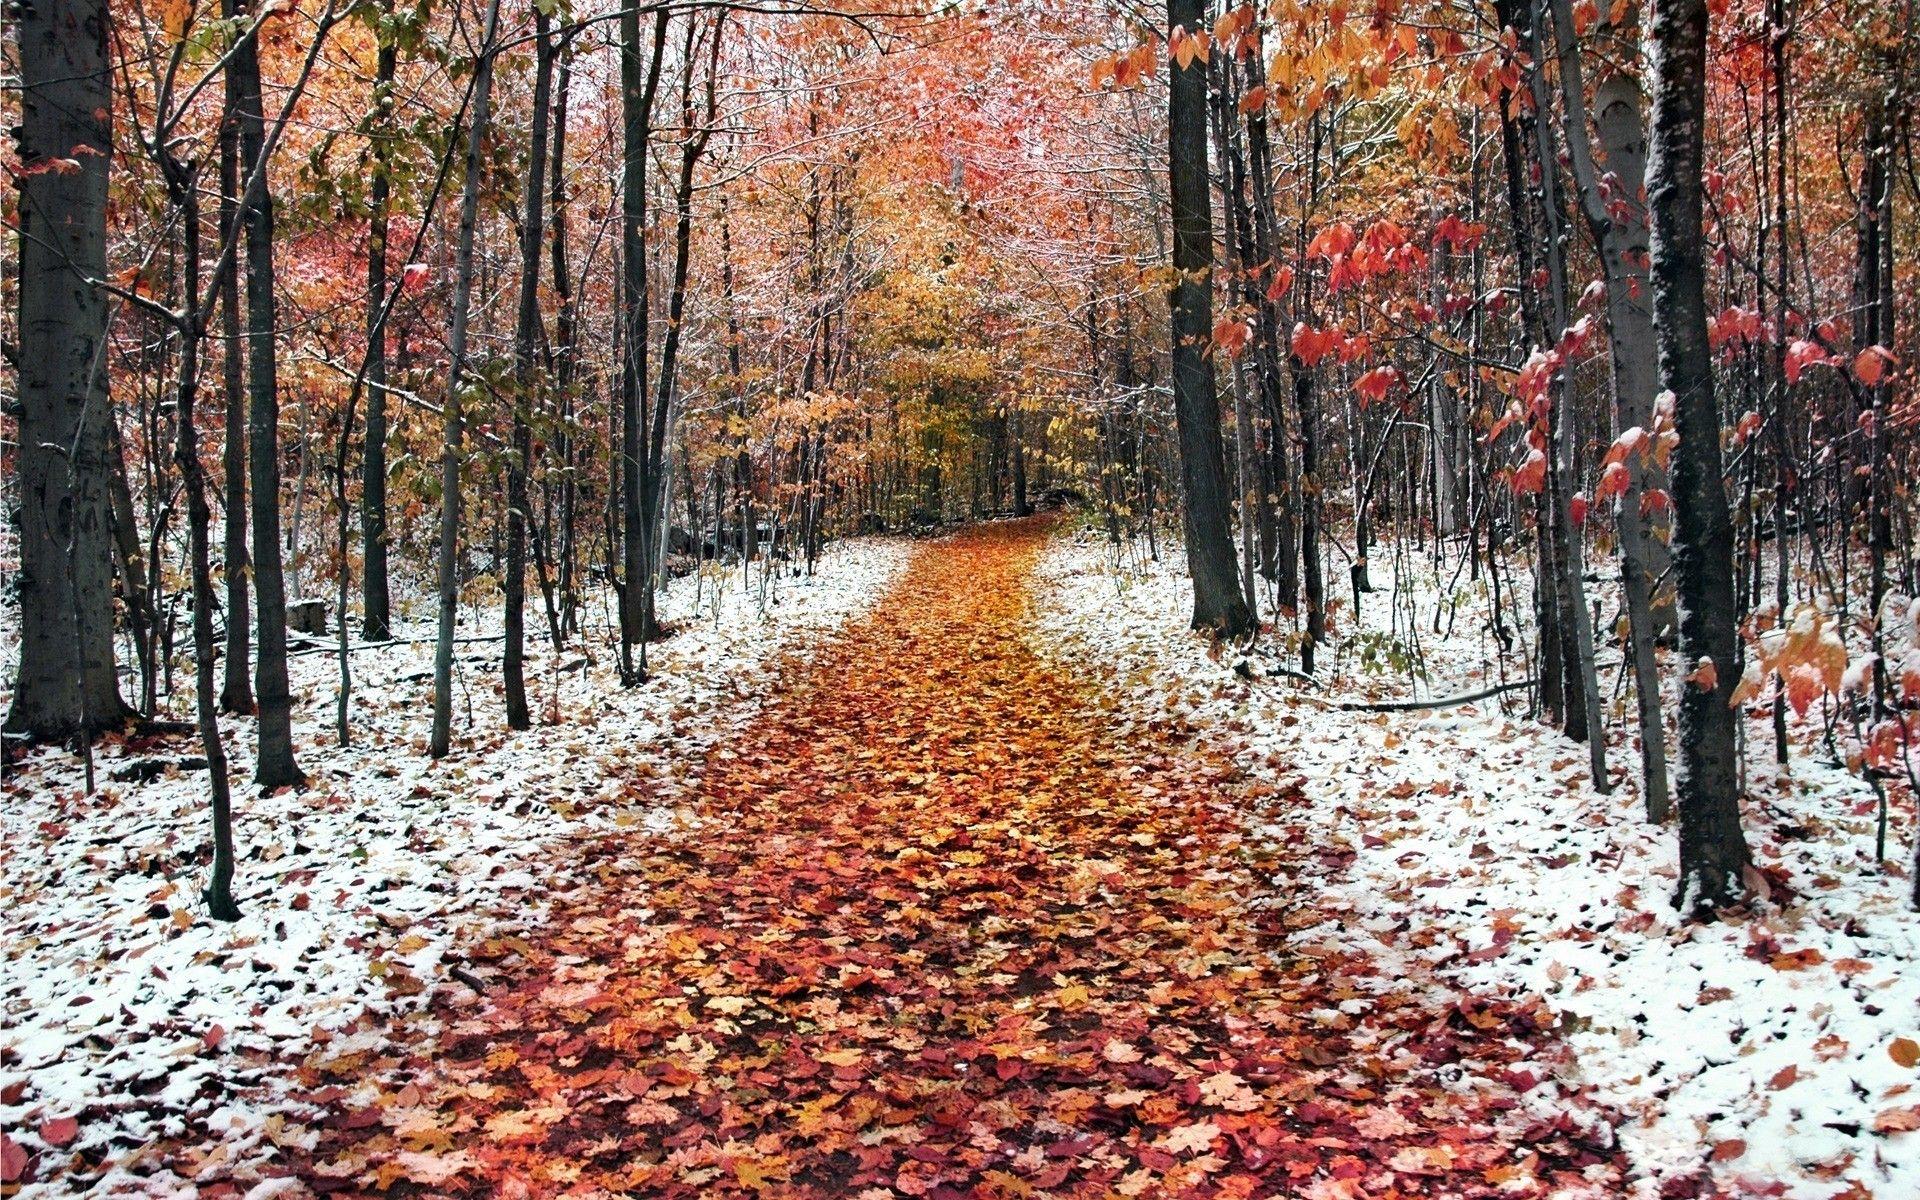 Late autumn the first snow fell wallpaper and image